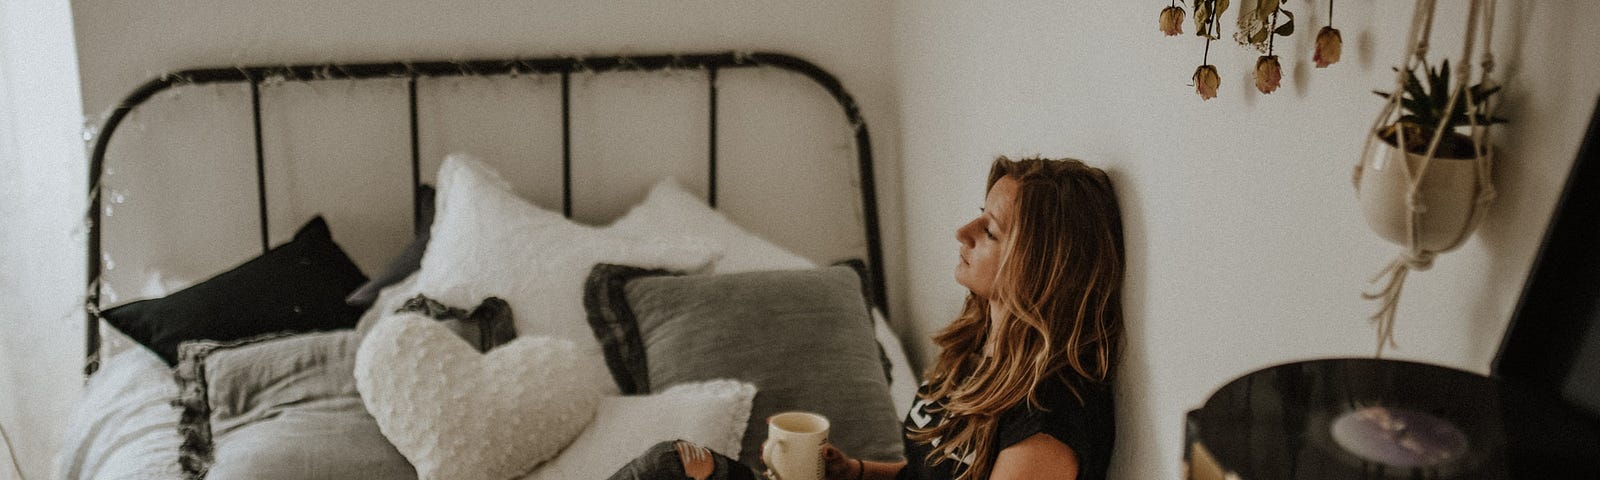 A woman sitting on a bed drinking coffee.